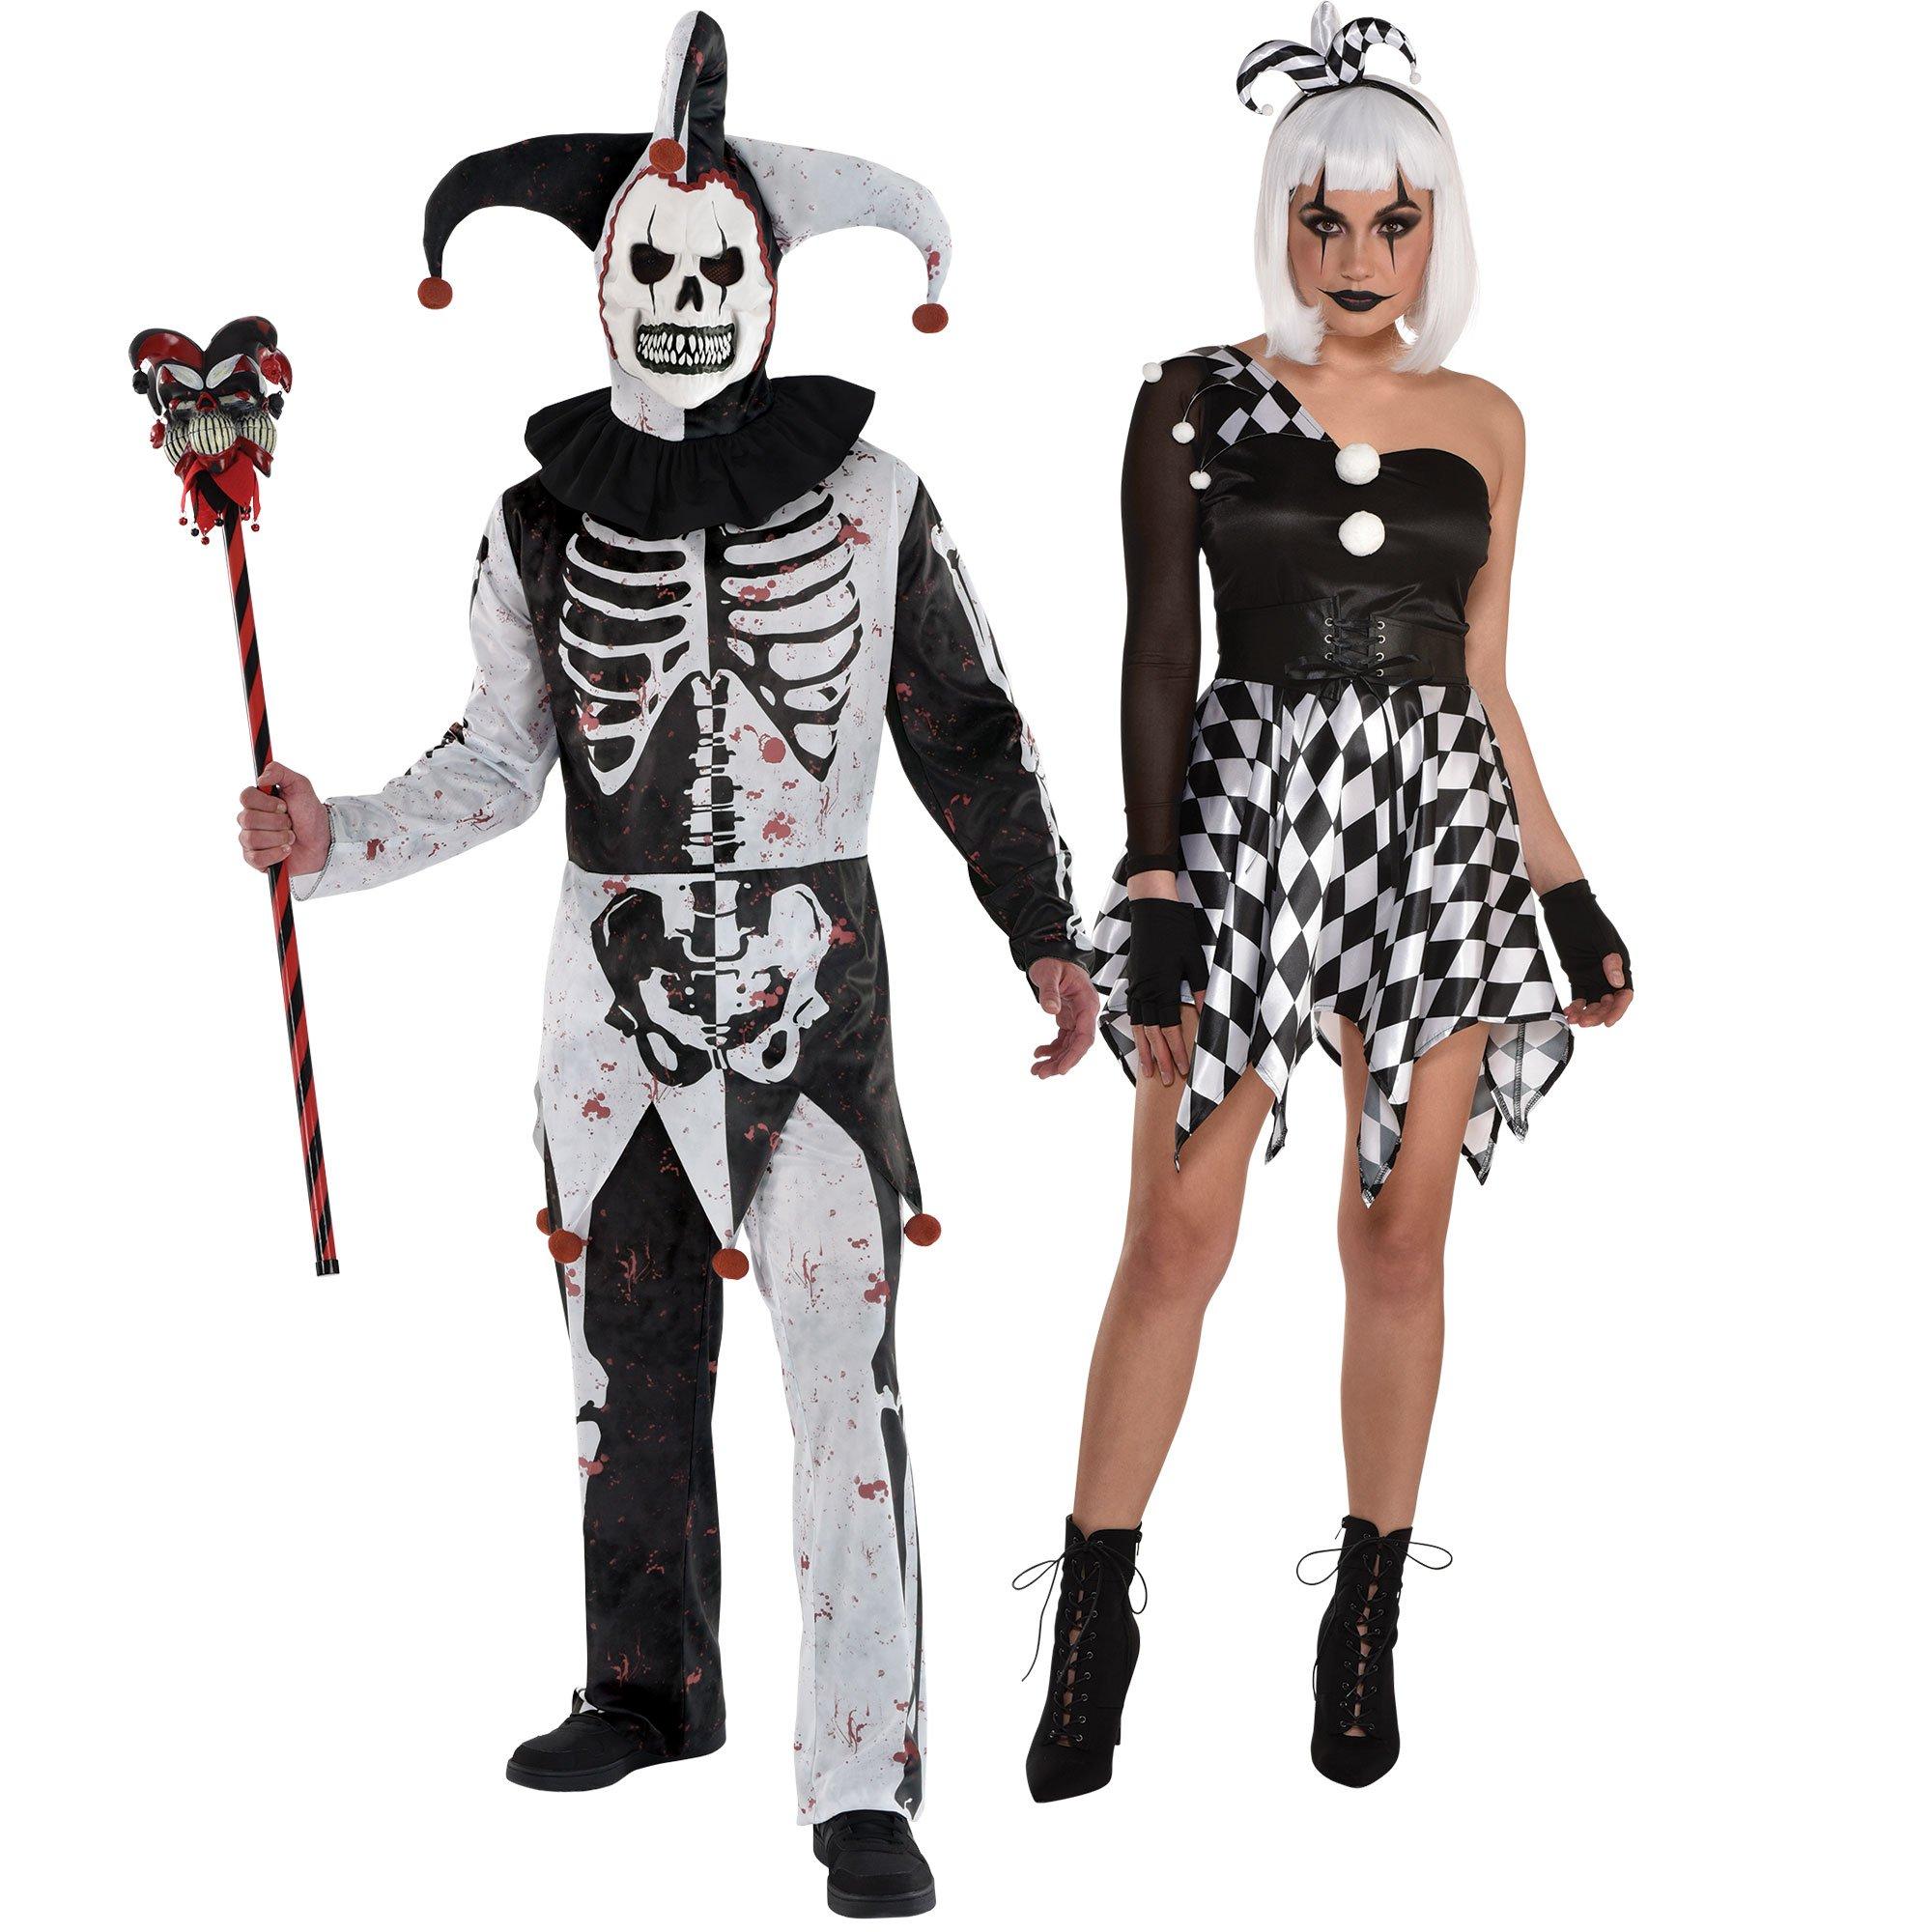 Creepy Circus Family Costumes | Party City